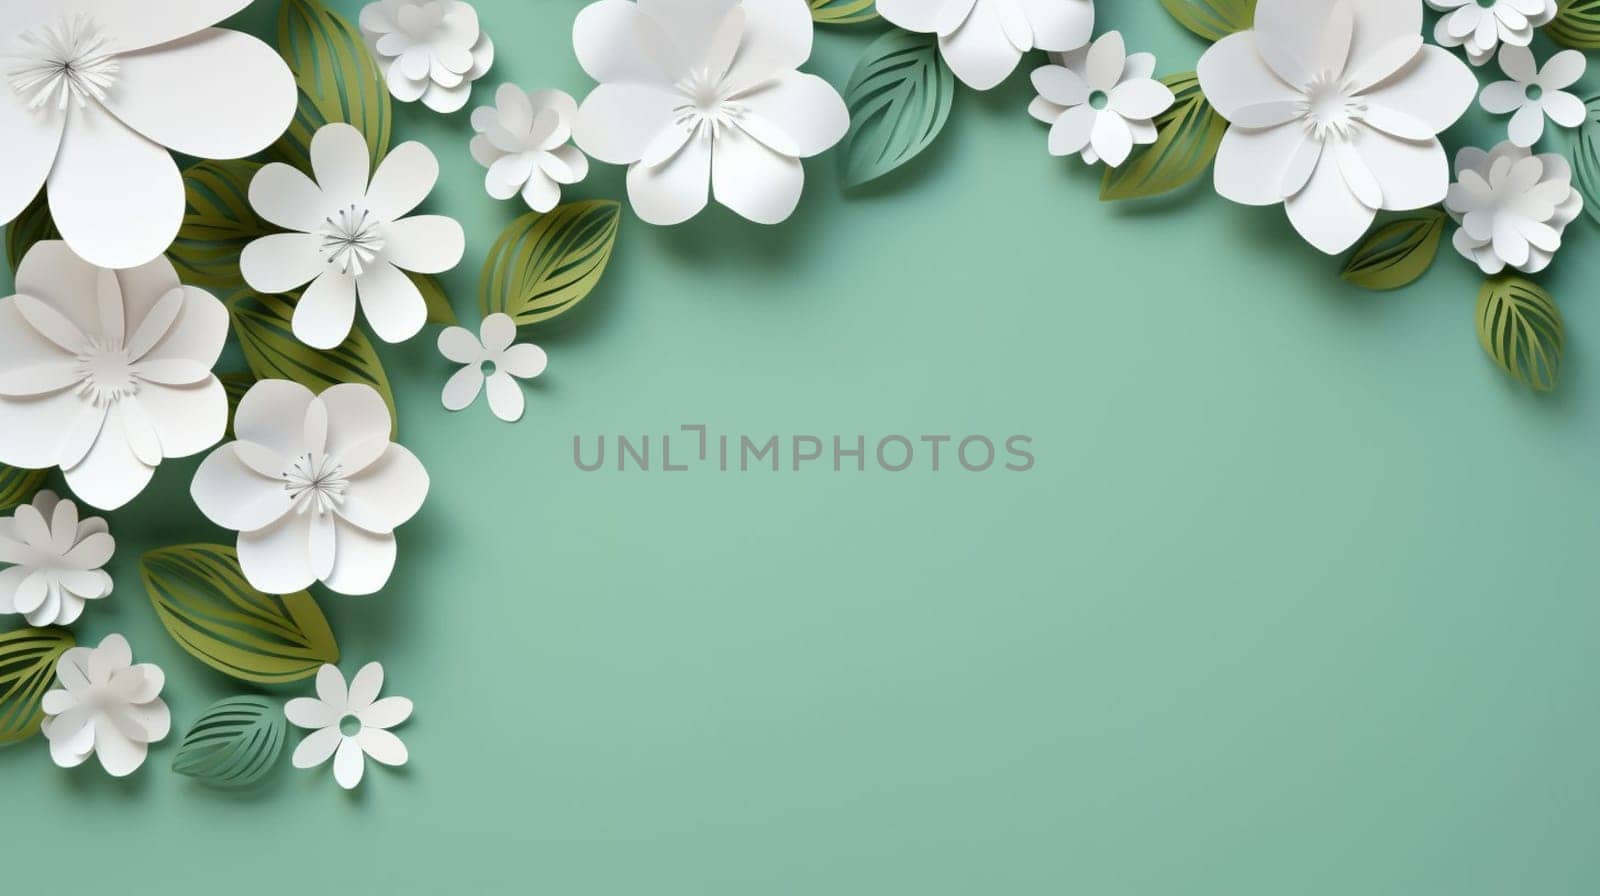 A 3D illustration of white paper flowers and green leaves on a solid dark green background, with a creative design and crafted aesthetic. High quality photo